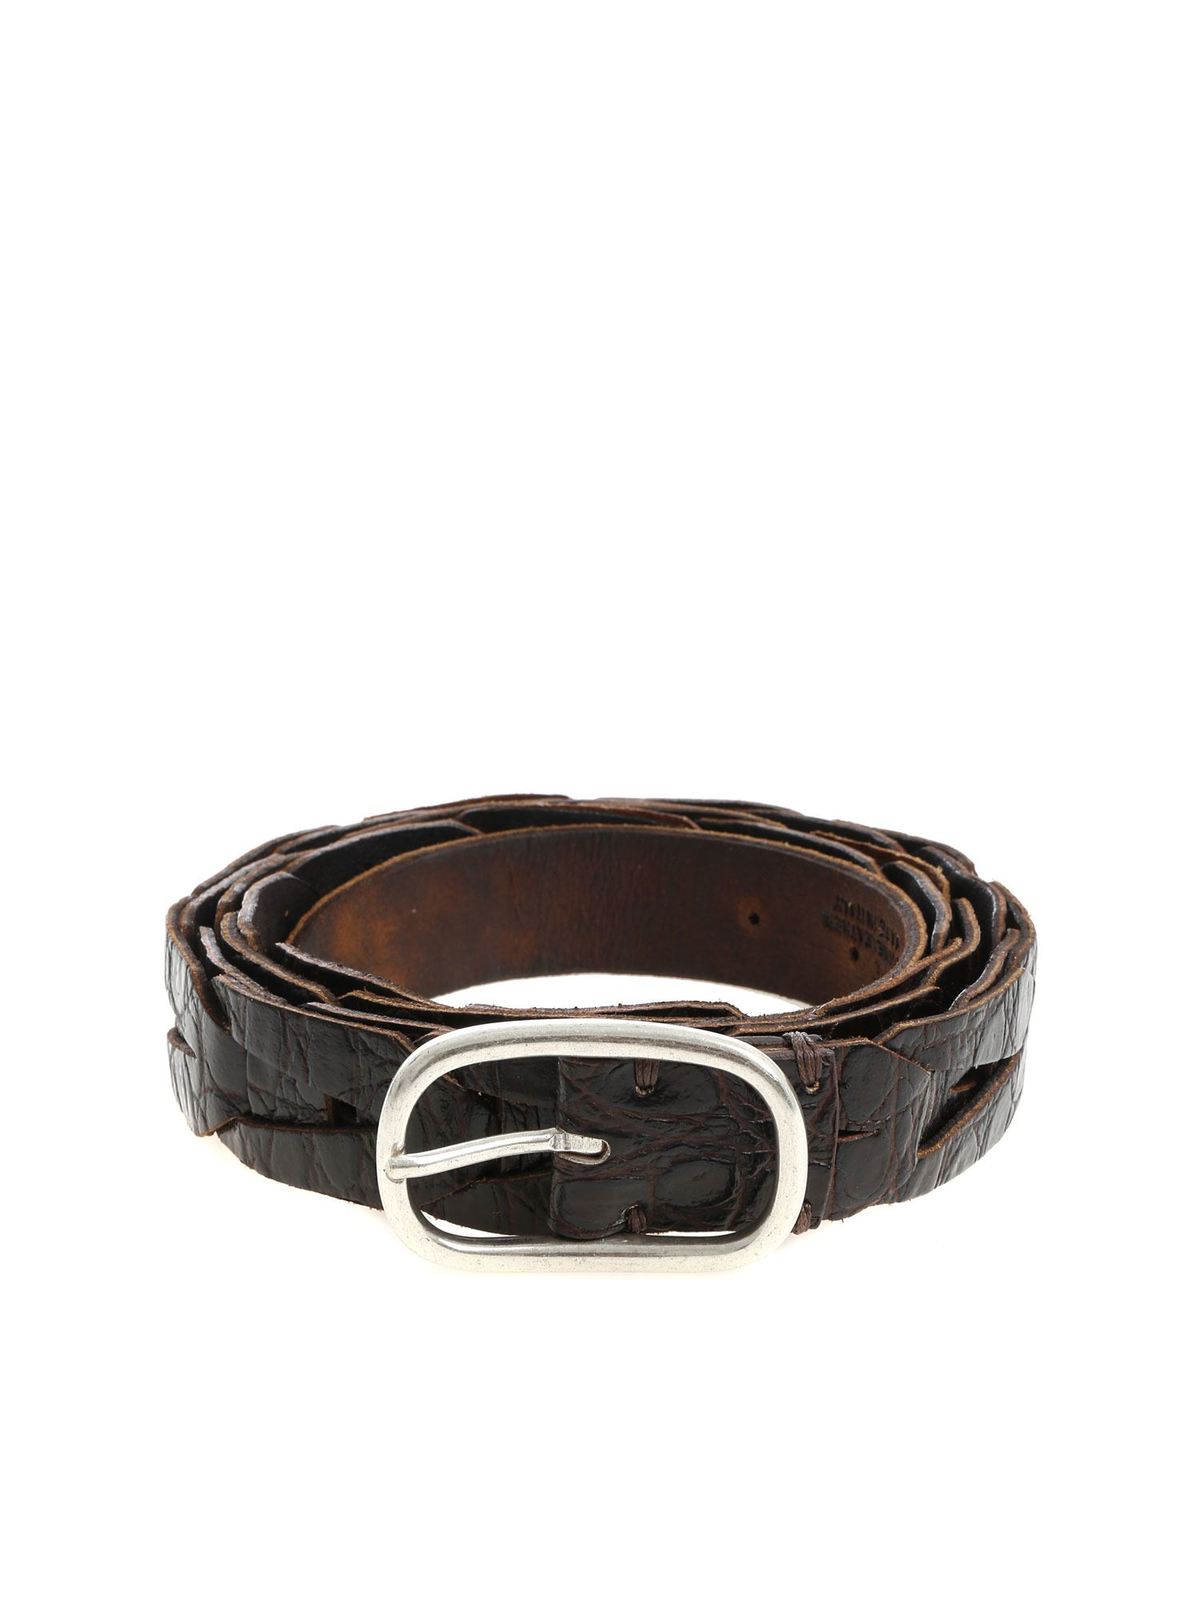 ANDREA D'AMICO COCO EFFECT BROWN LEATHER BELT